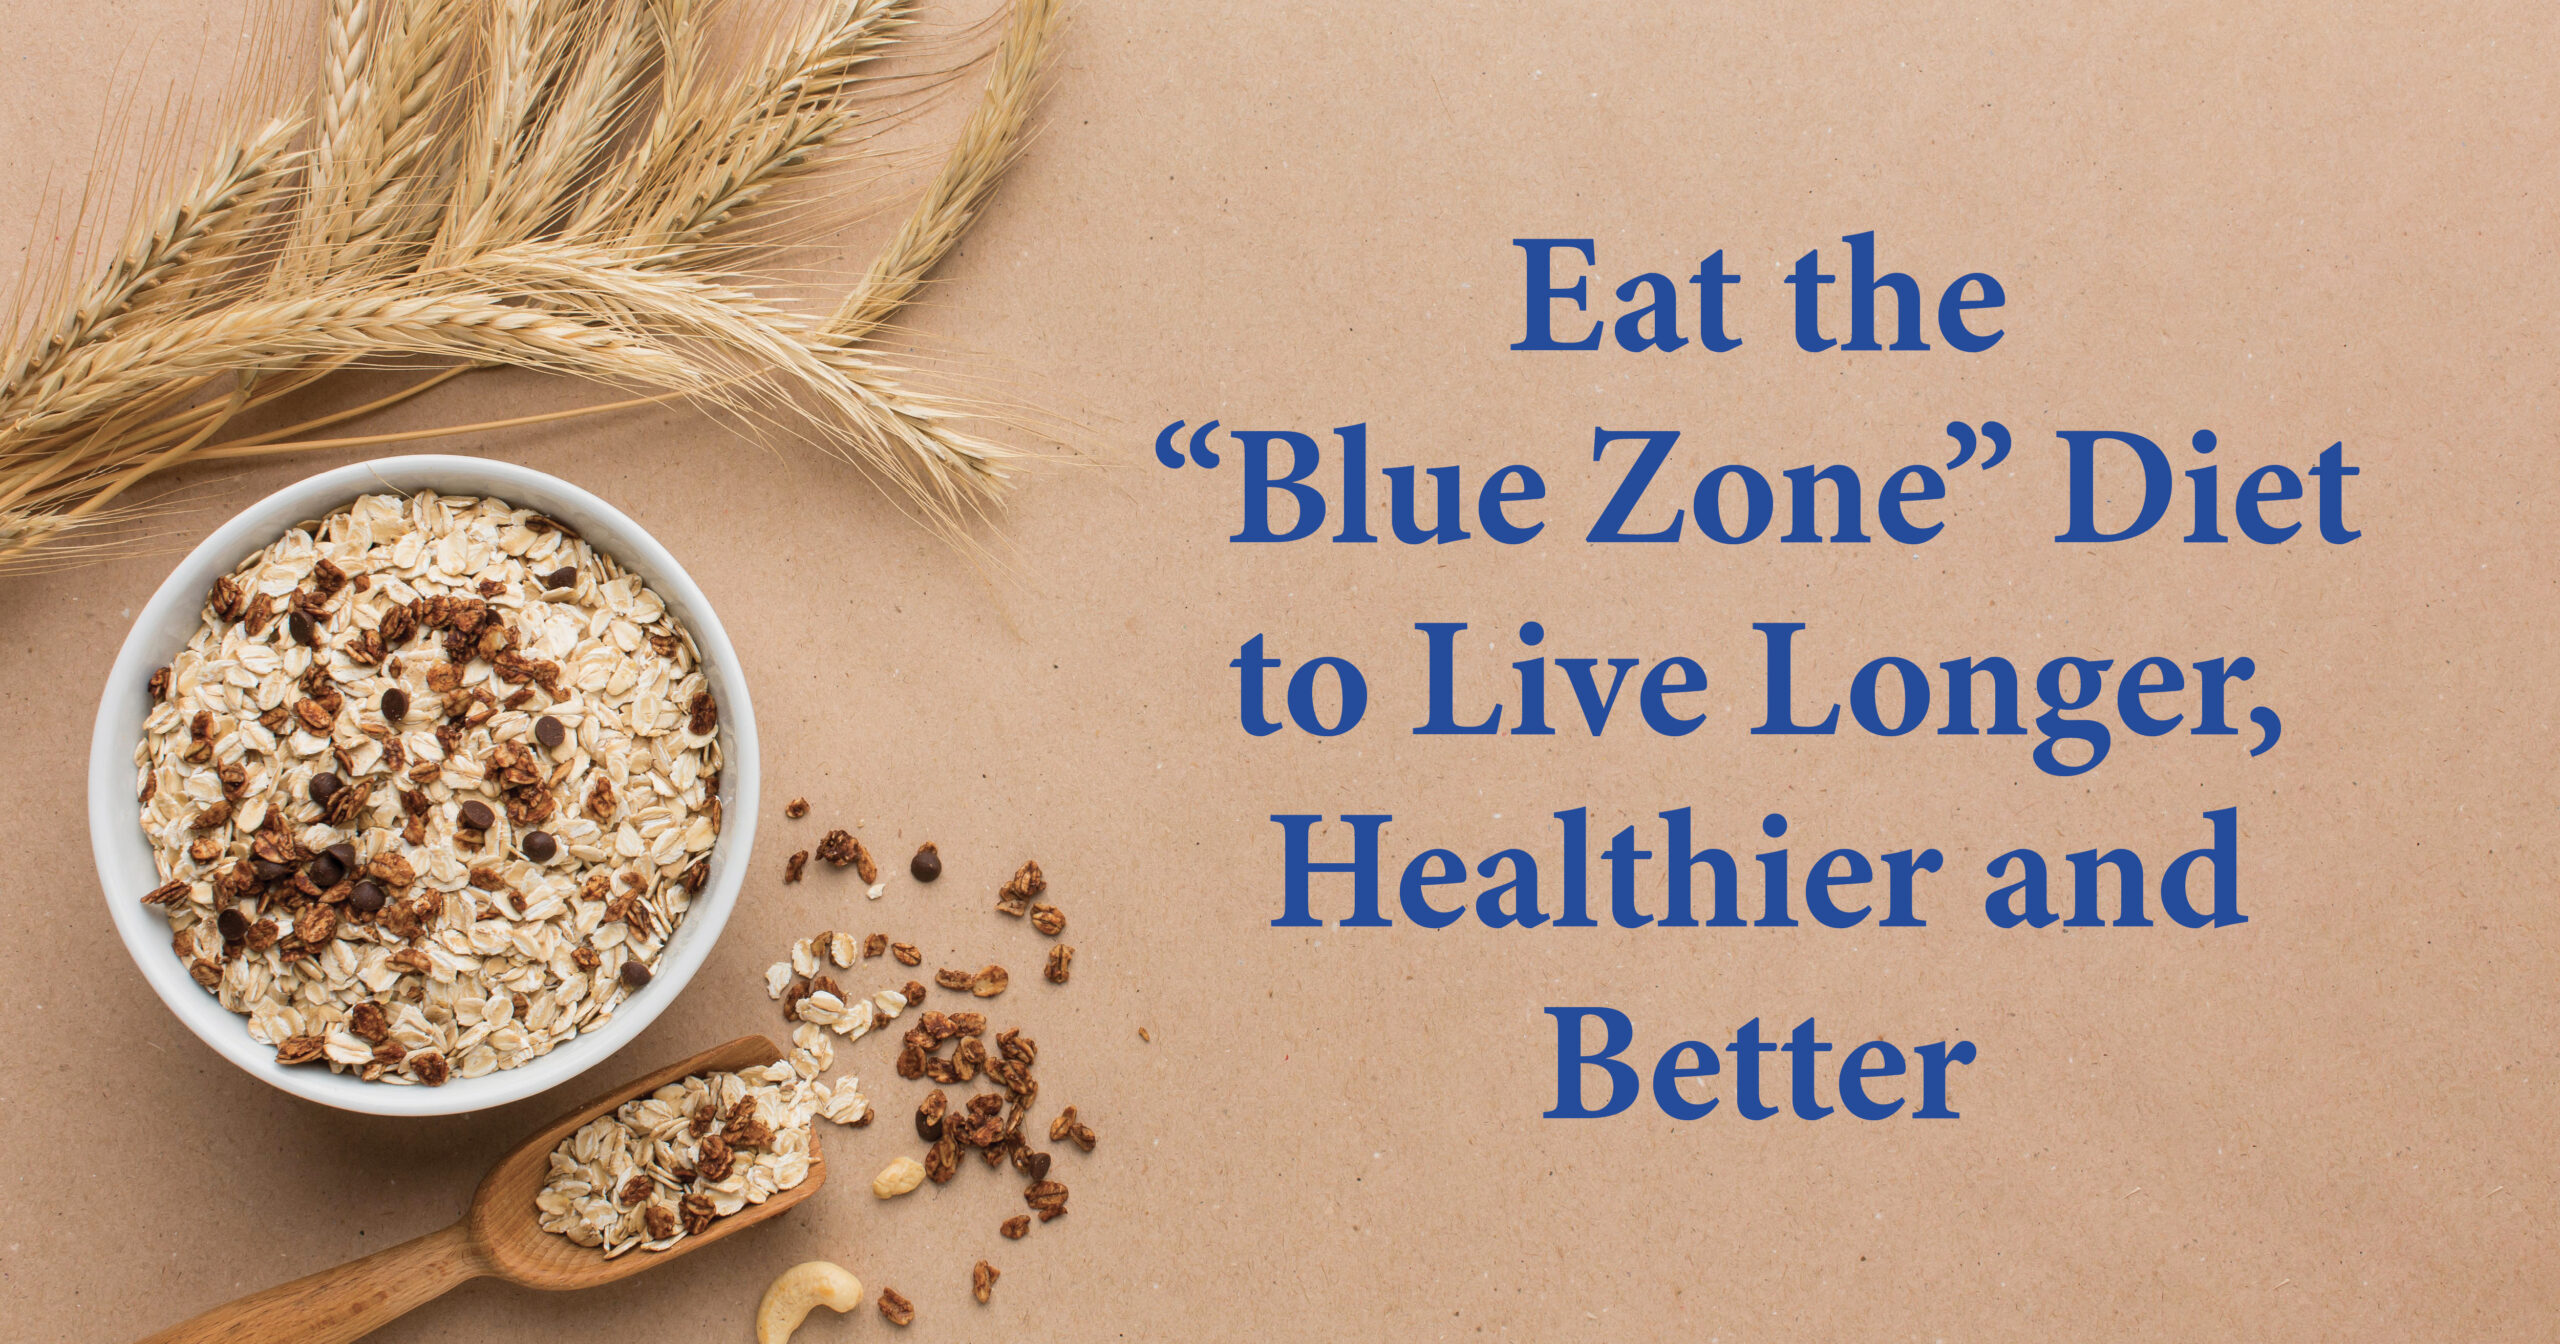 Eat the “Blue Zone” Diet to Live Longer, Healthier and Better